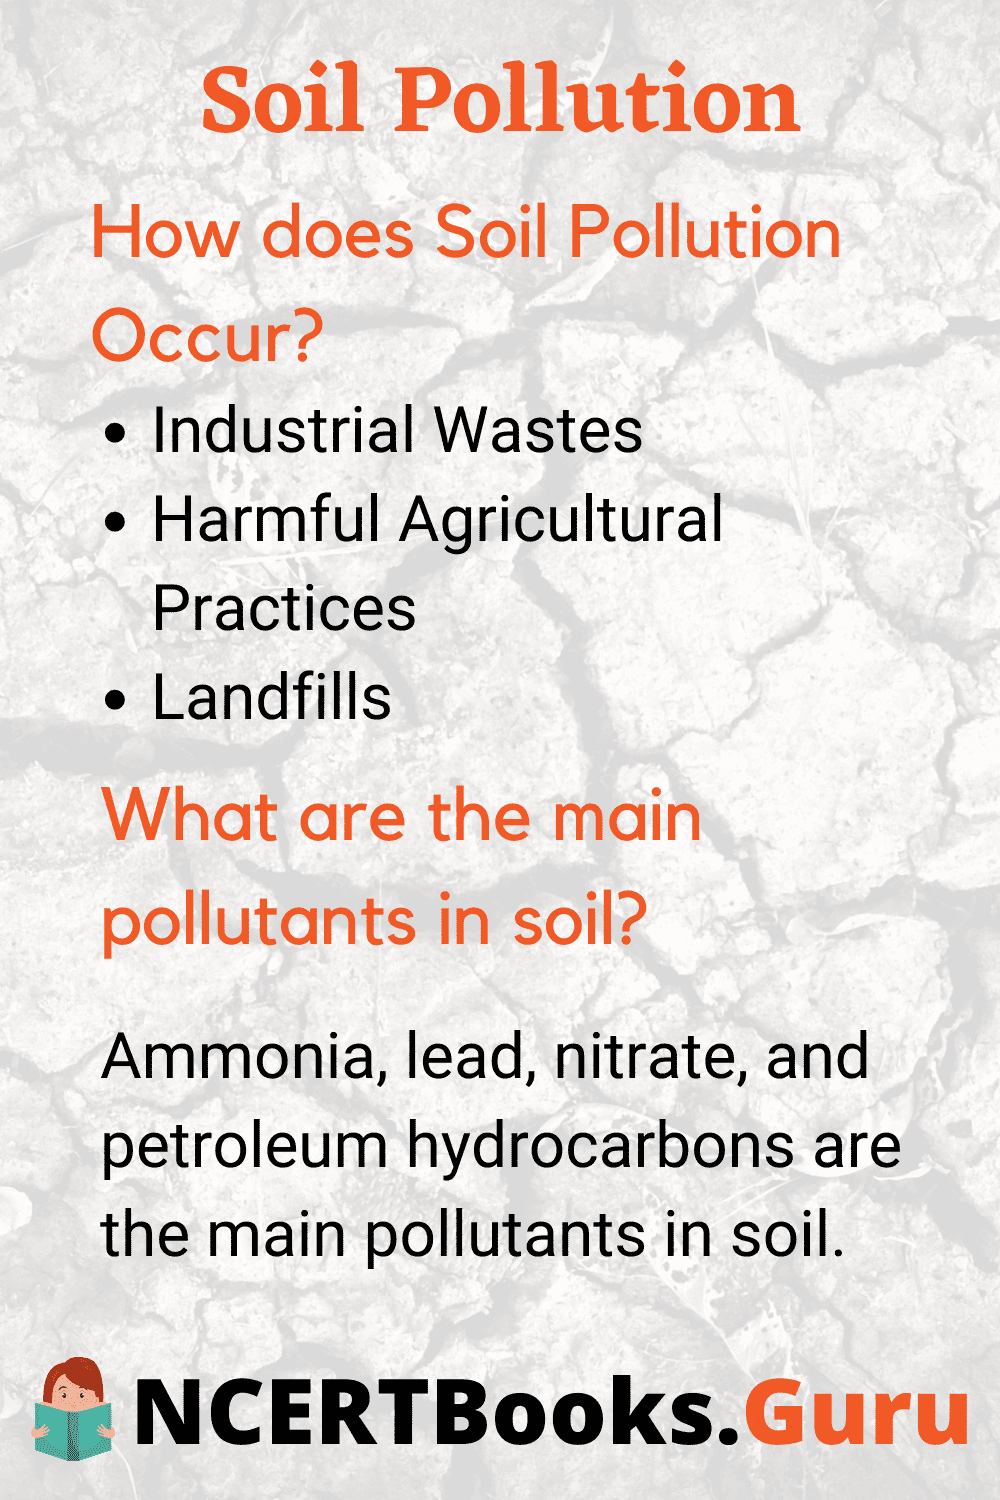 How does Soil Pollution Occur